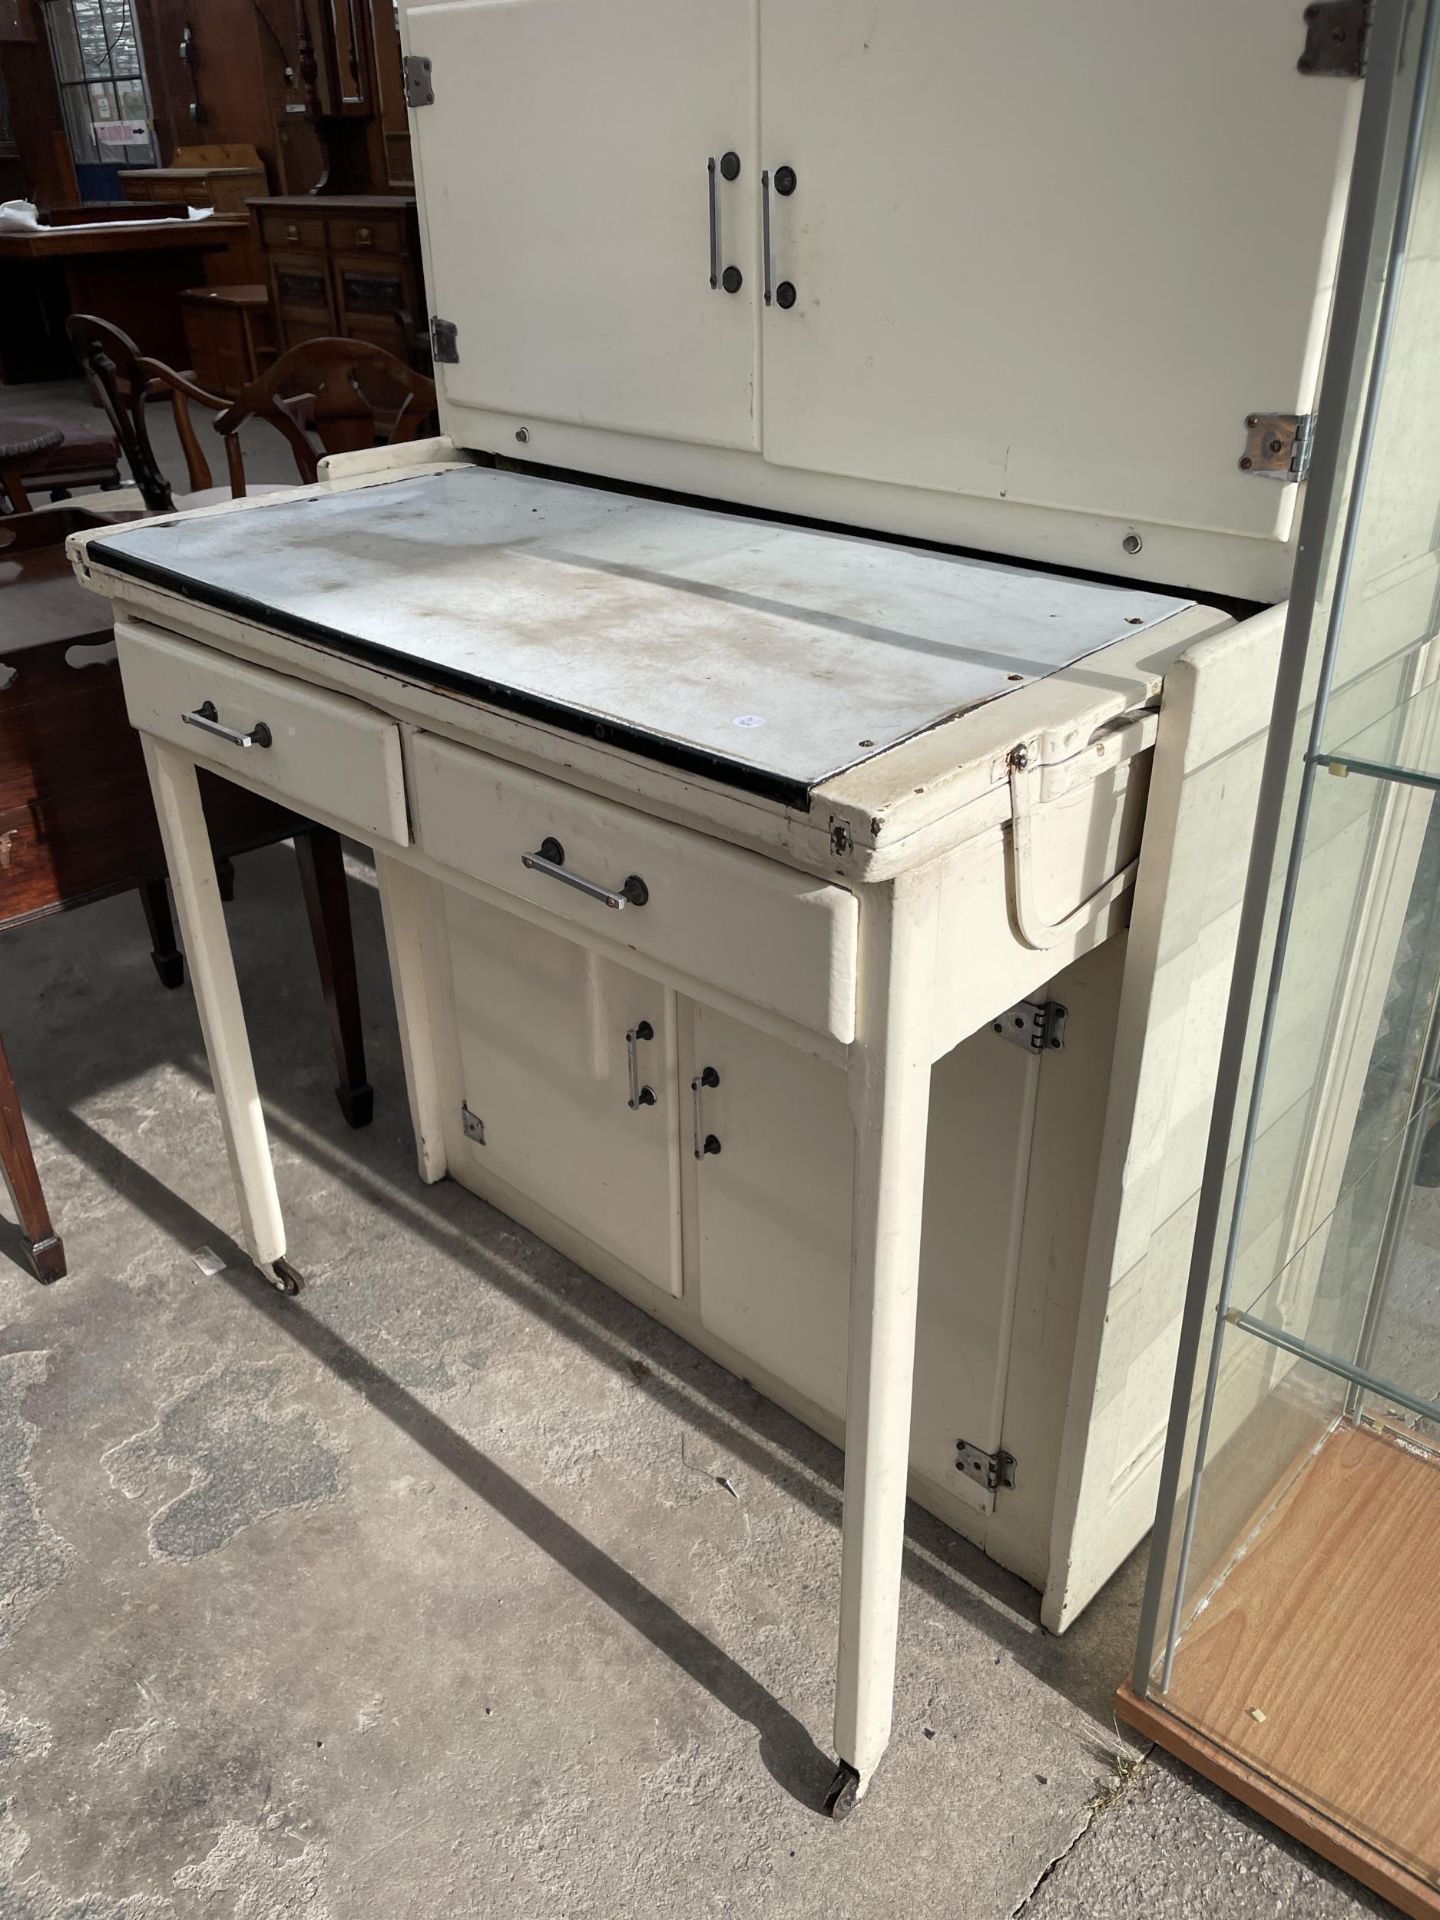 A 1950'S METALWARE KITCHEN CABINET WITH PULL-OUT ENAMEL WORK SURFACE, ON LEGS WITH CASTERS, WITH - Image 2 of 5